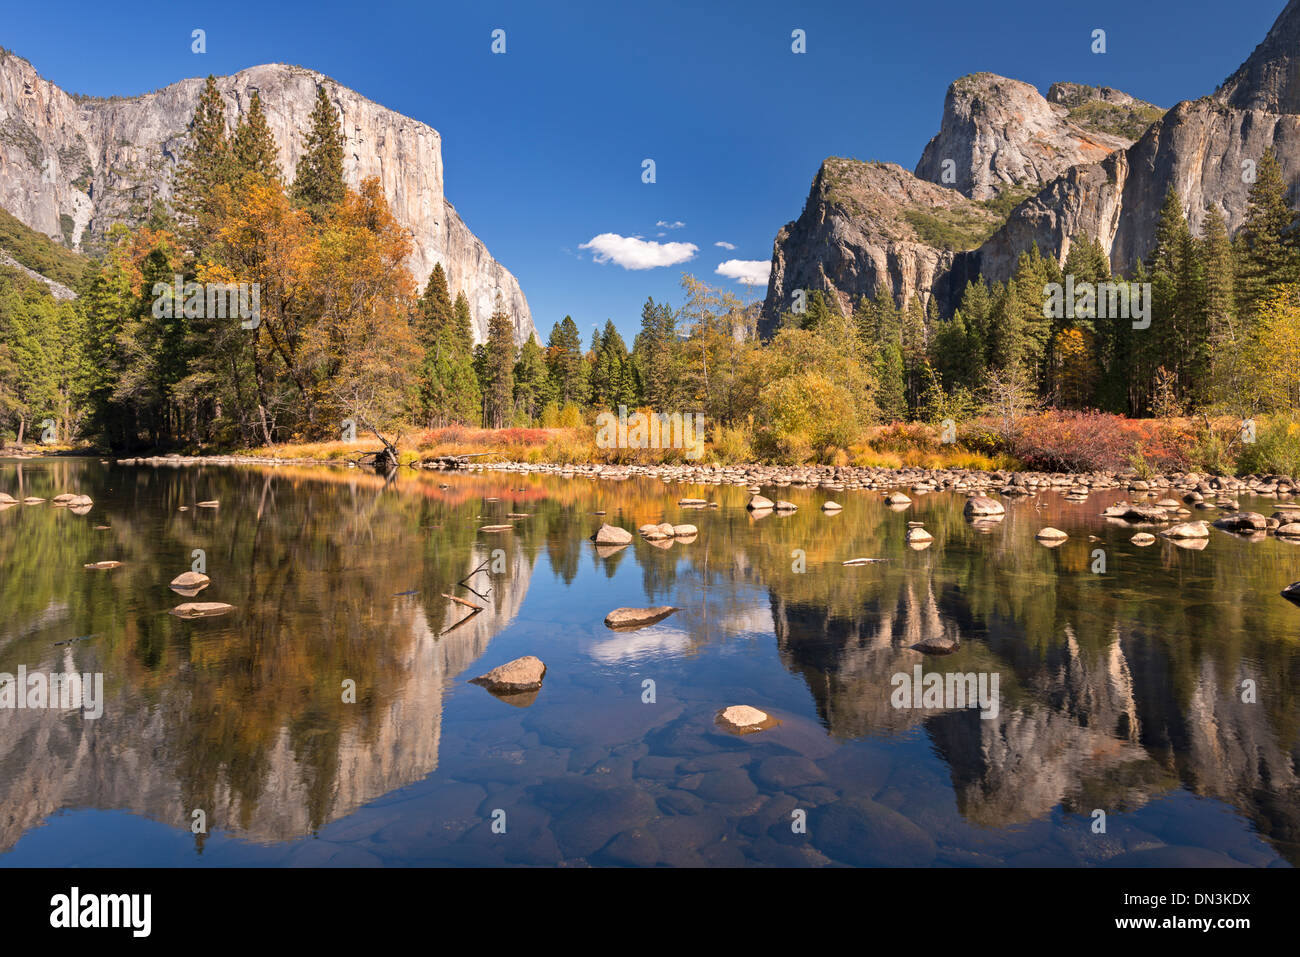 Valley View of El Capitan from the Merced River, Yosemite, California, USA. Autumn (October) 2013. Stock Photo